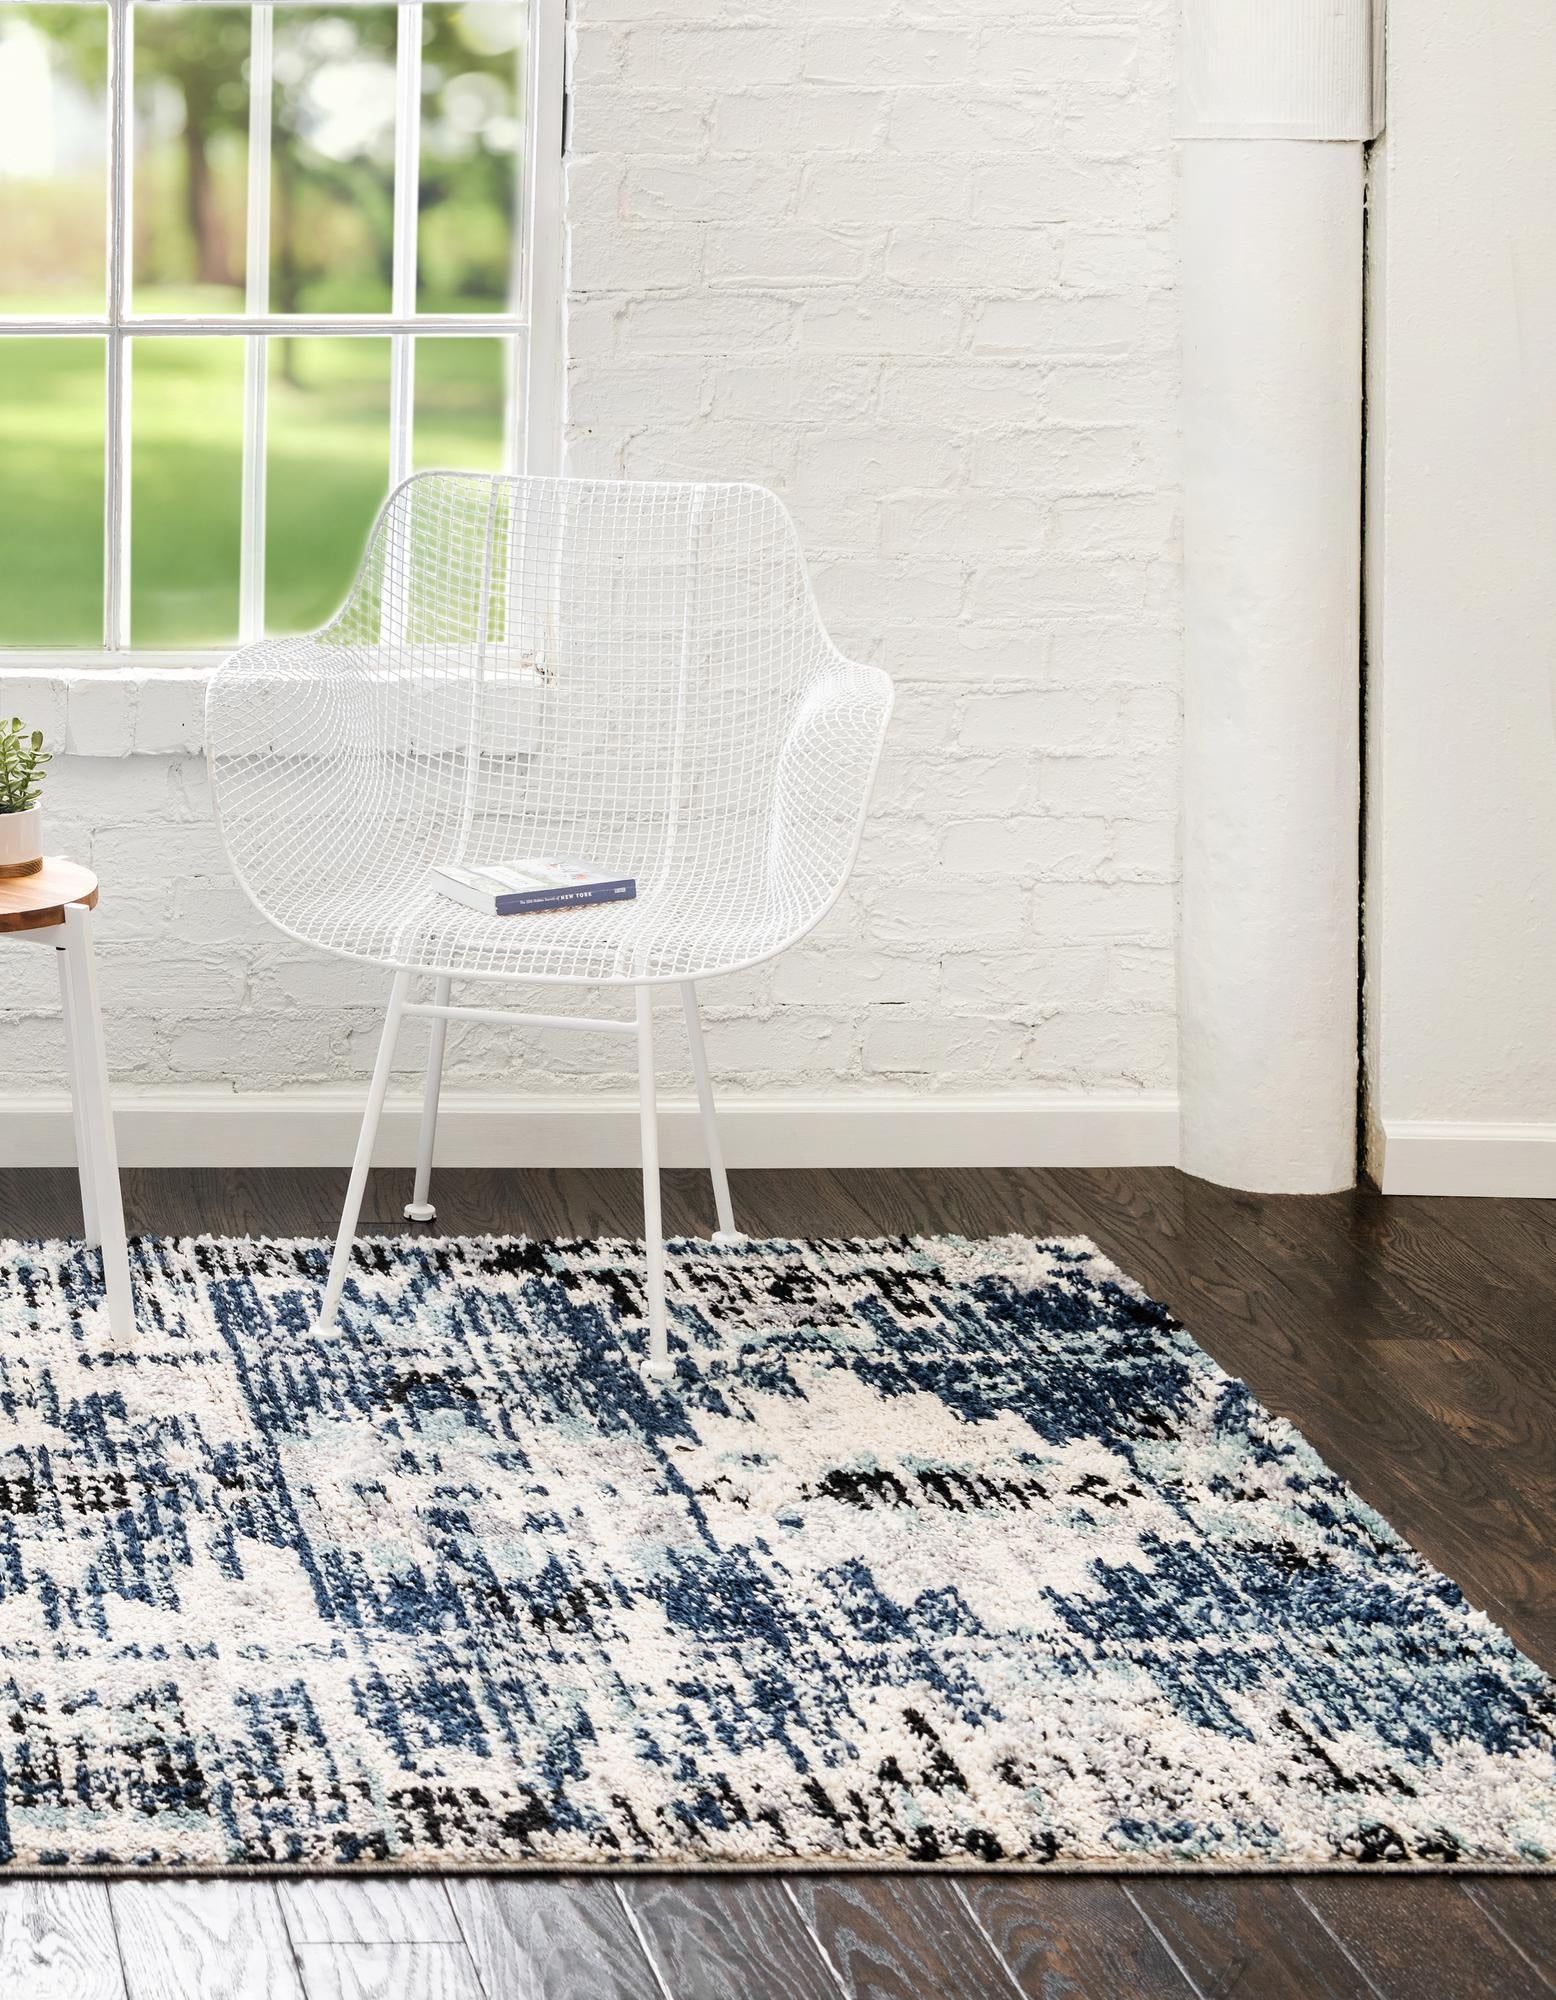 Blue 275Cm X 365Cm Tucson Rug | Irugs Ch Pertaining To Blue Tucson Rugs (View 10 of 15)